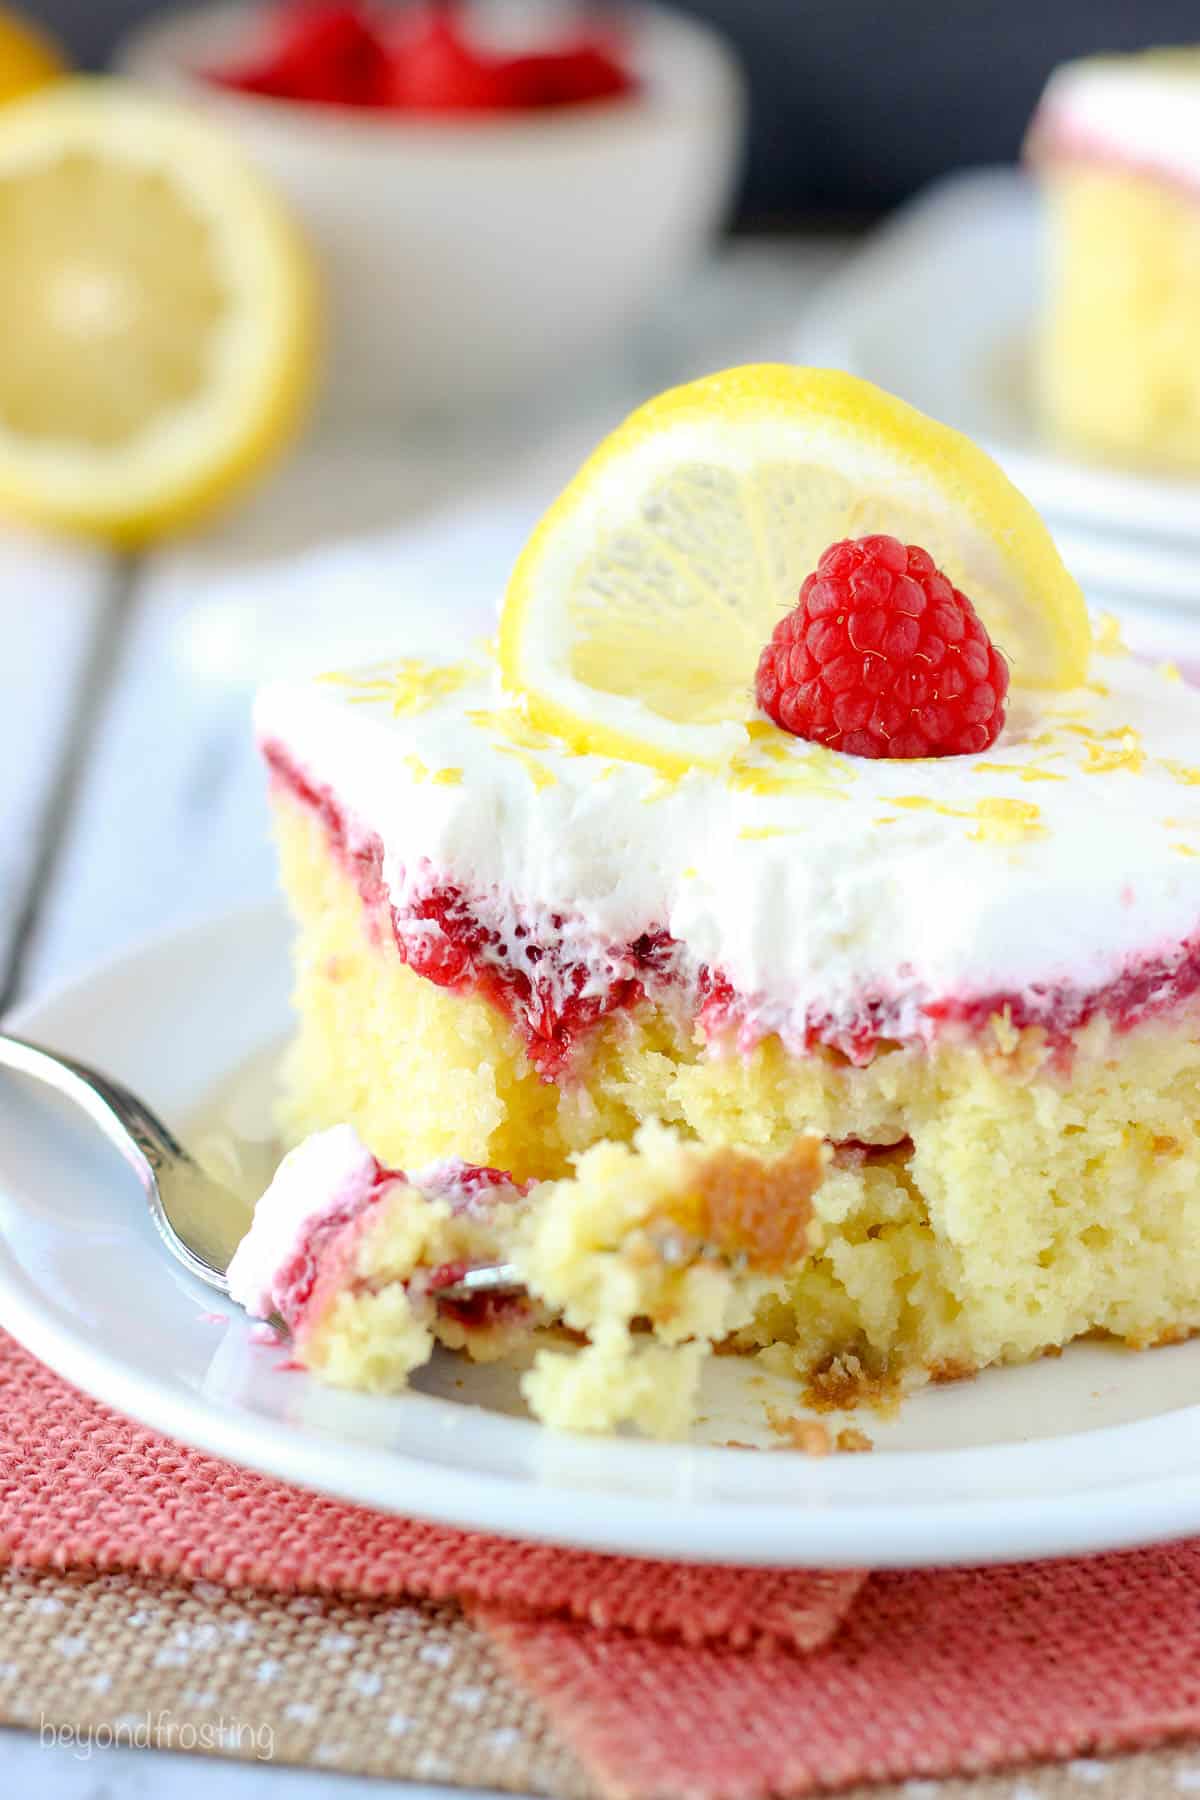 side view of a slice of lemon raspberry cake garnished with a raspberry and a lemon slice with a forkful taken out